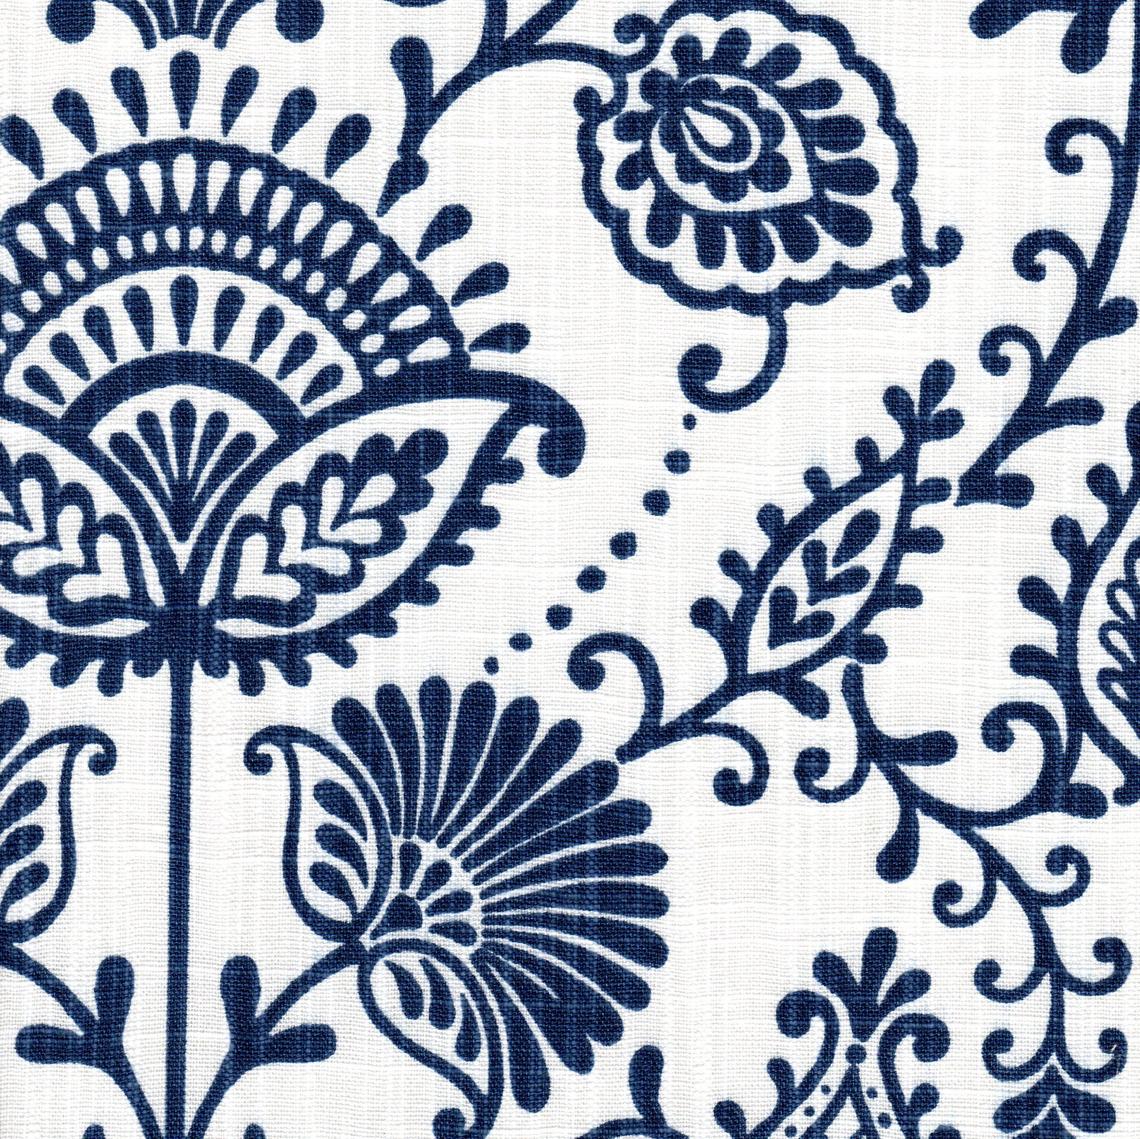 pillow sham in silas italian denim blue country floral